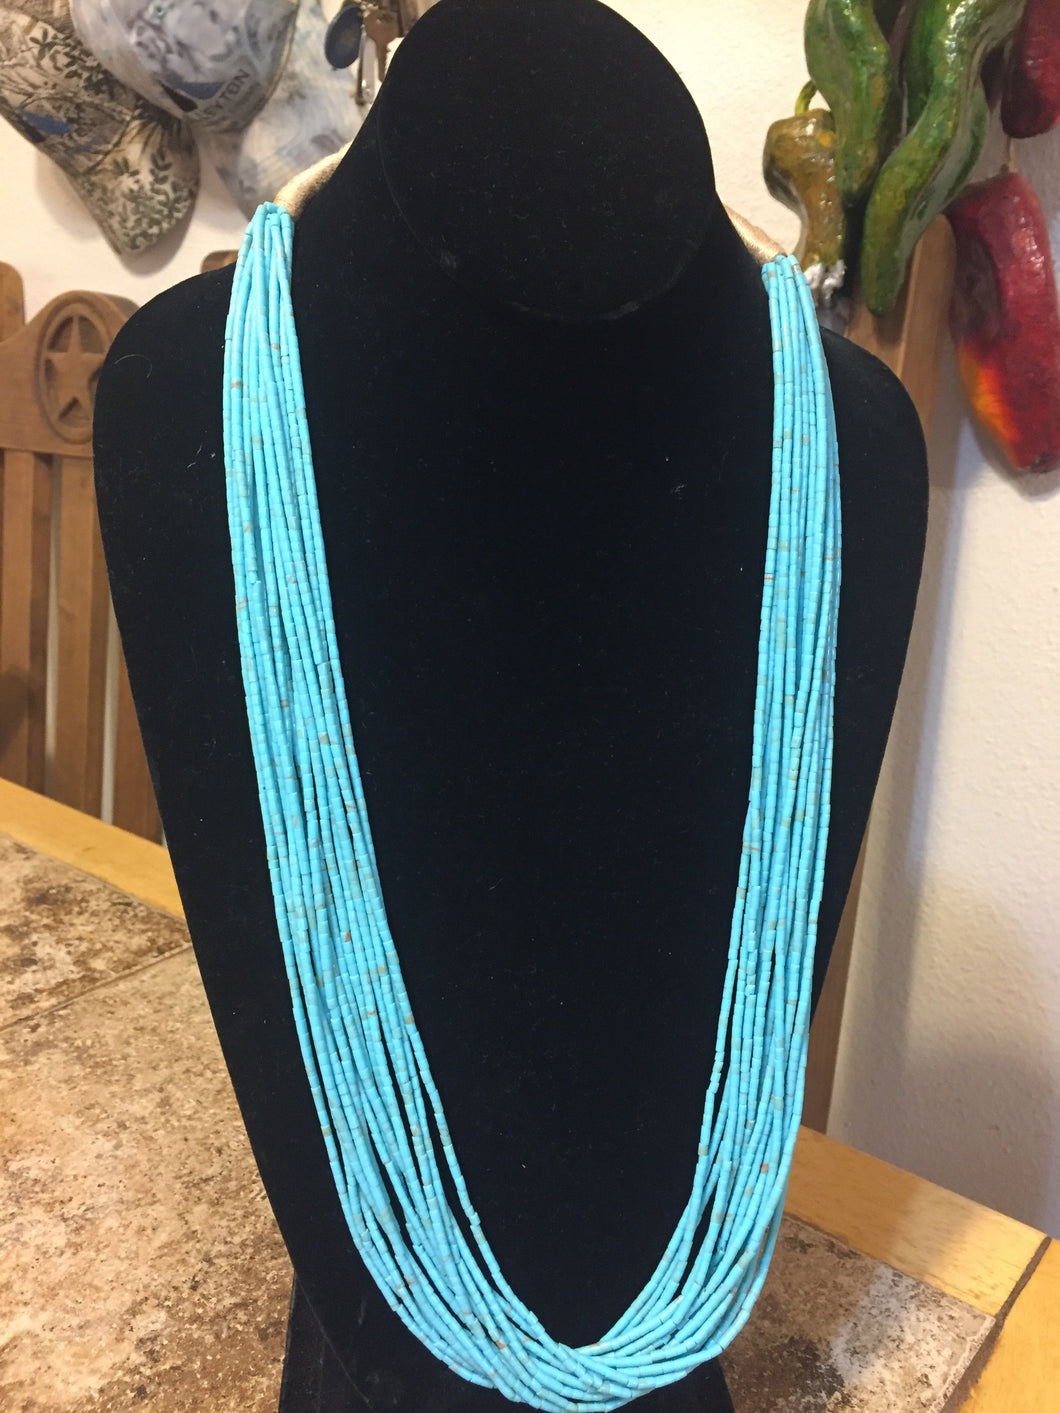 The “seed bead” necklace